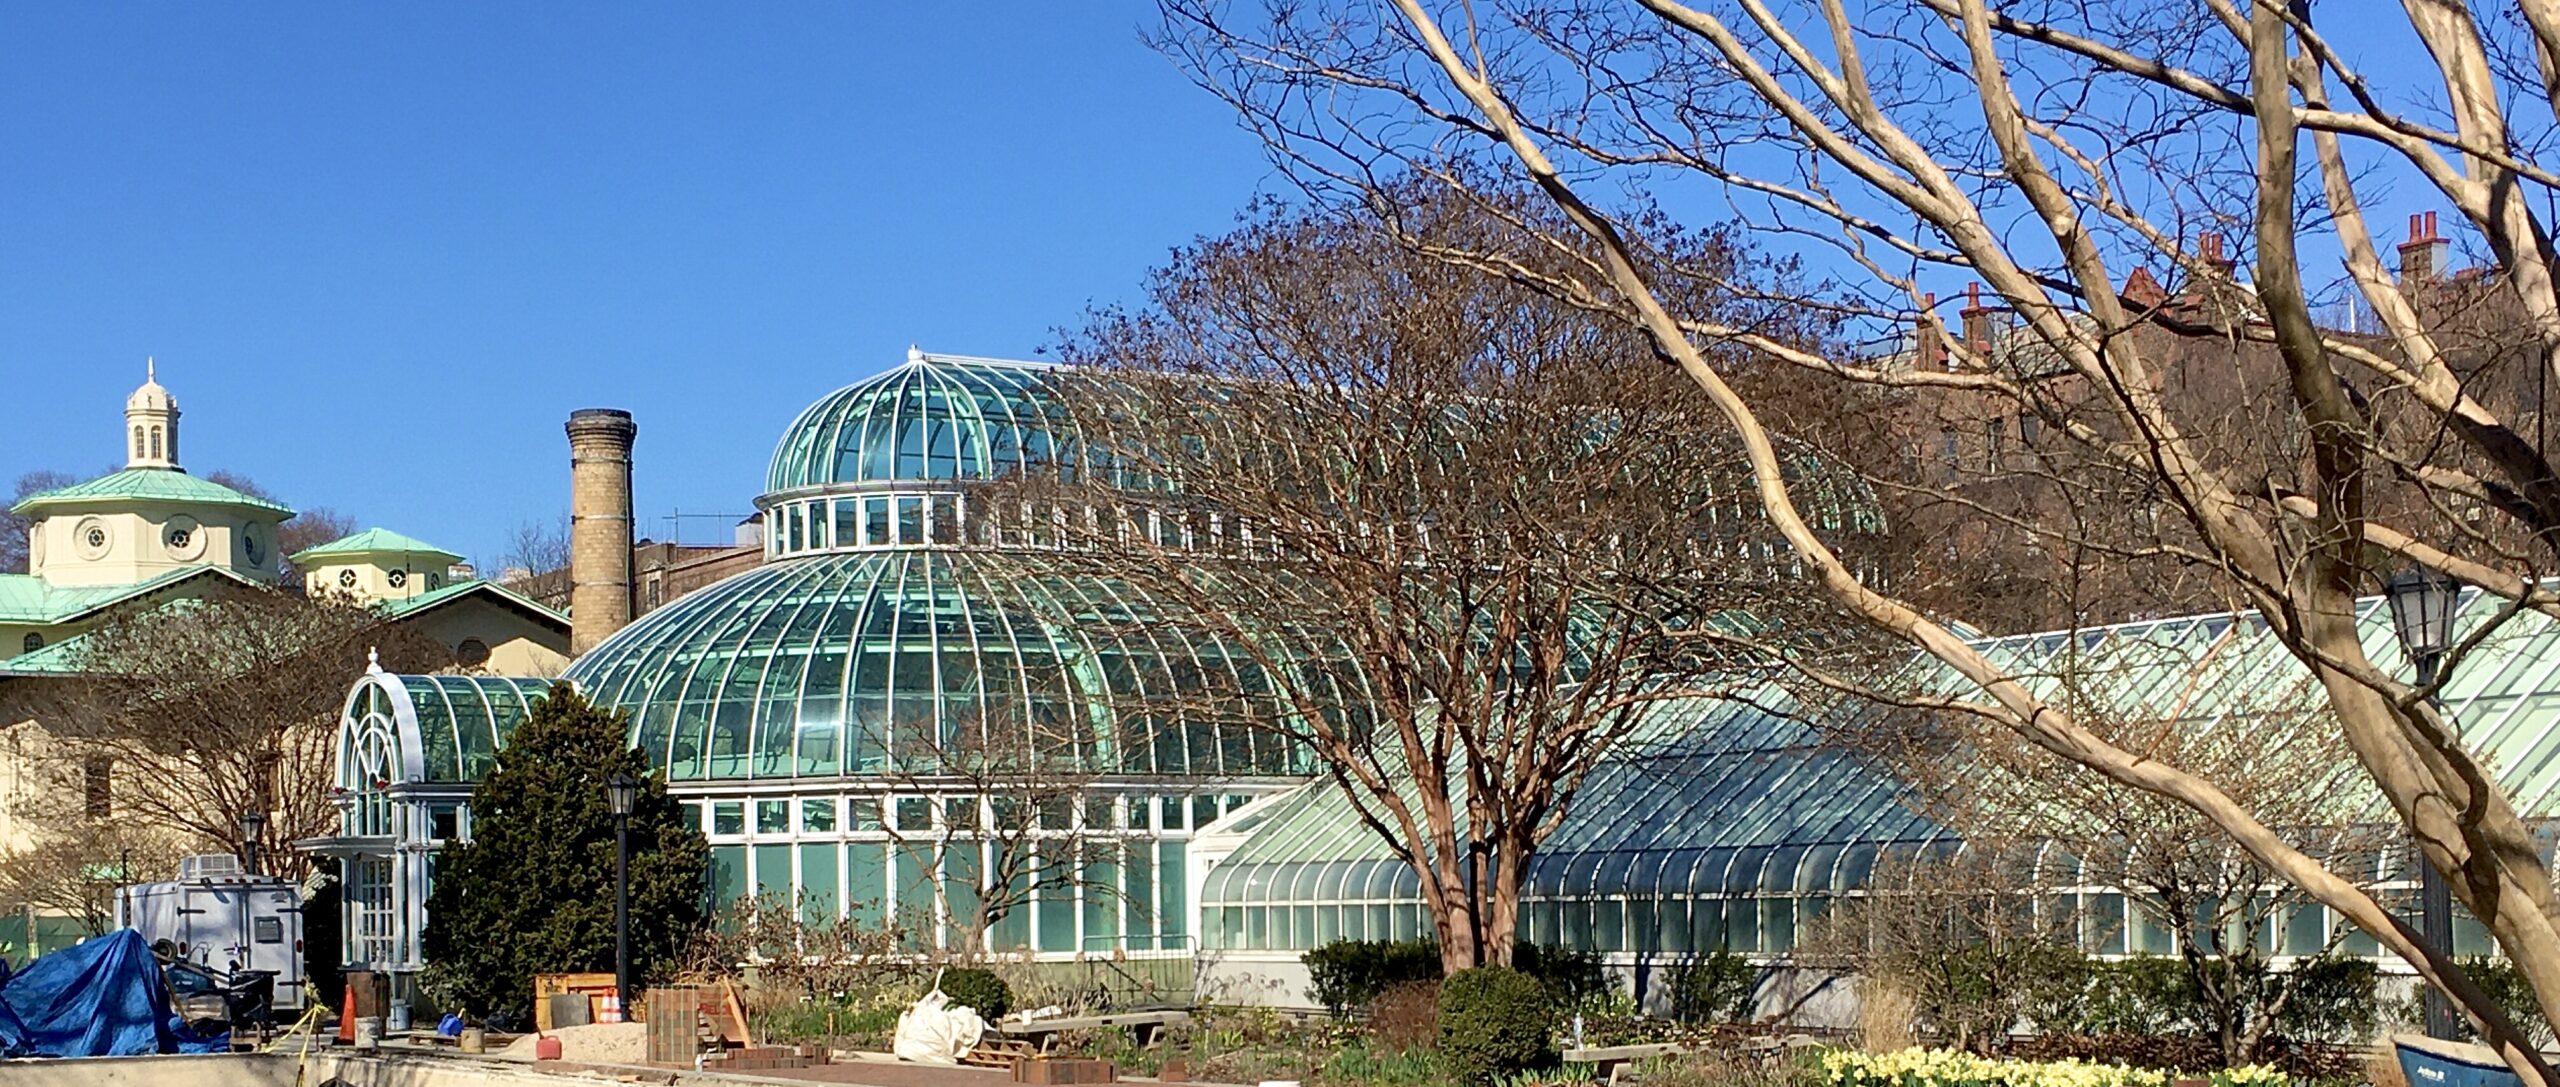 When I visited Brooklyn Botanic Garden, the greenhouses had already been closed to keep people from standing close to one another. Photo: Lore Croghan/Brooklyn Eagle